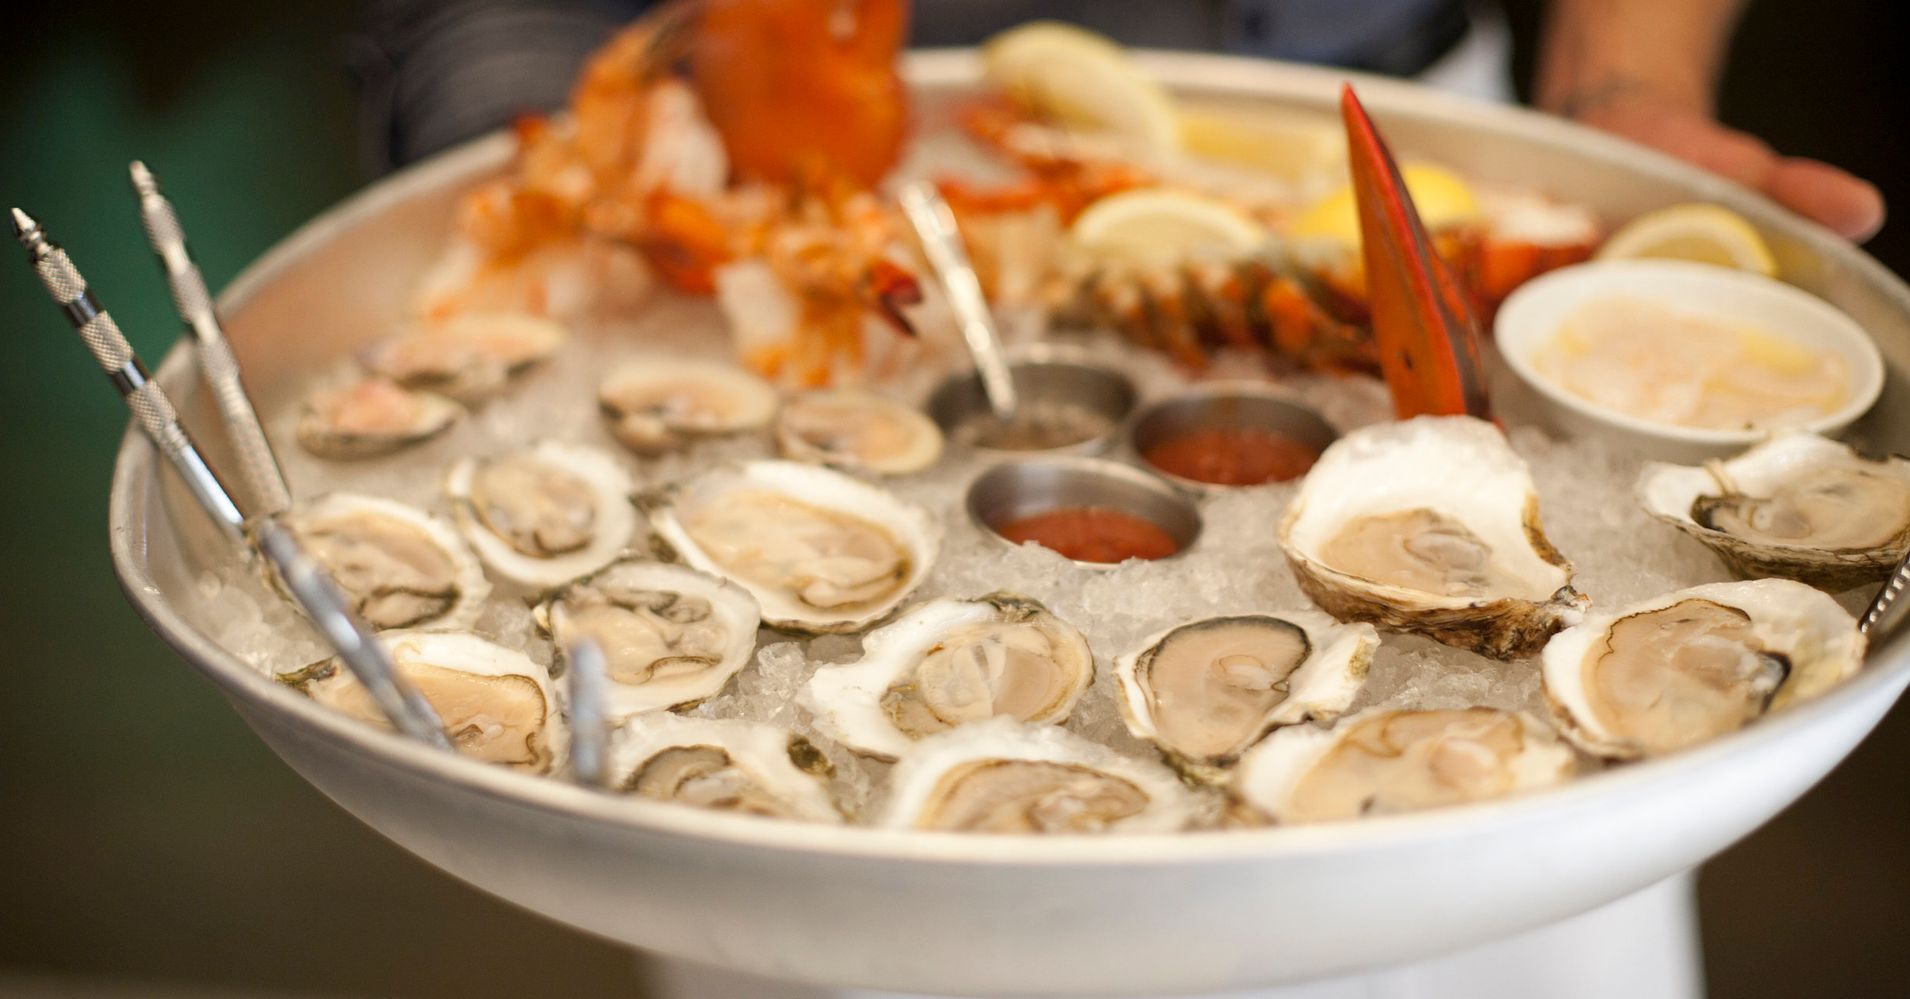 The Best Way To Eat An Oyster, According To Experts | HuffPost Life